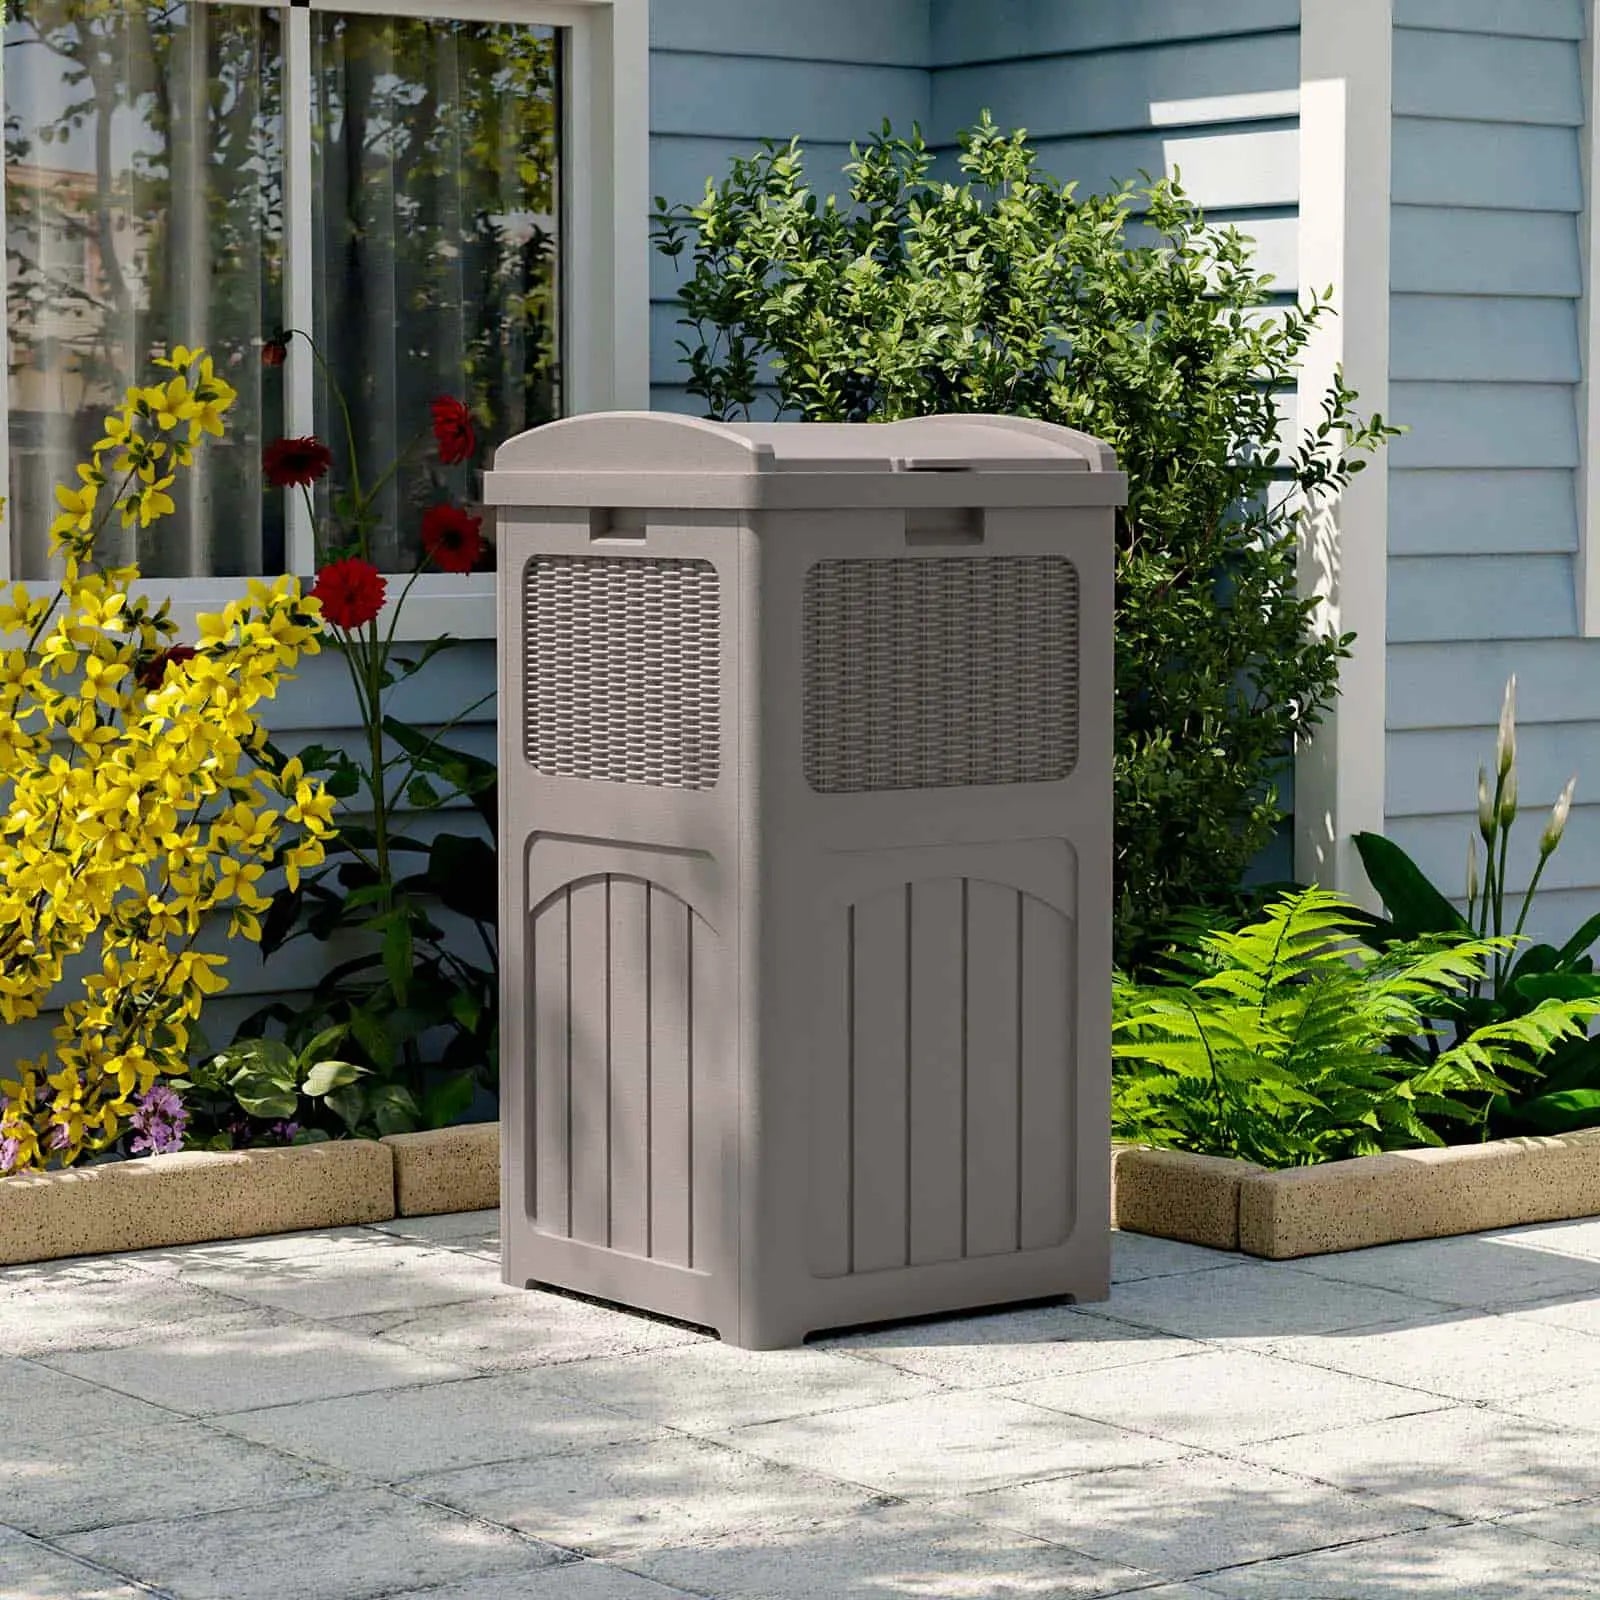 Patiowell 36 Gallon Resin Trash Can-outdoor-2